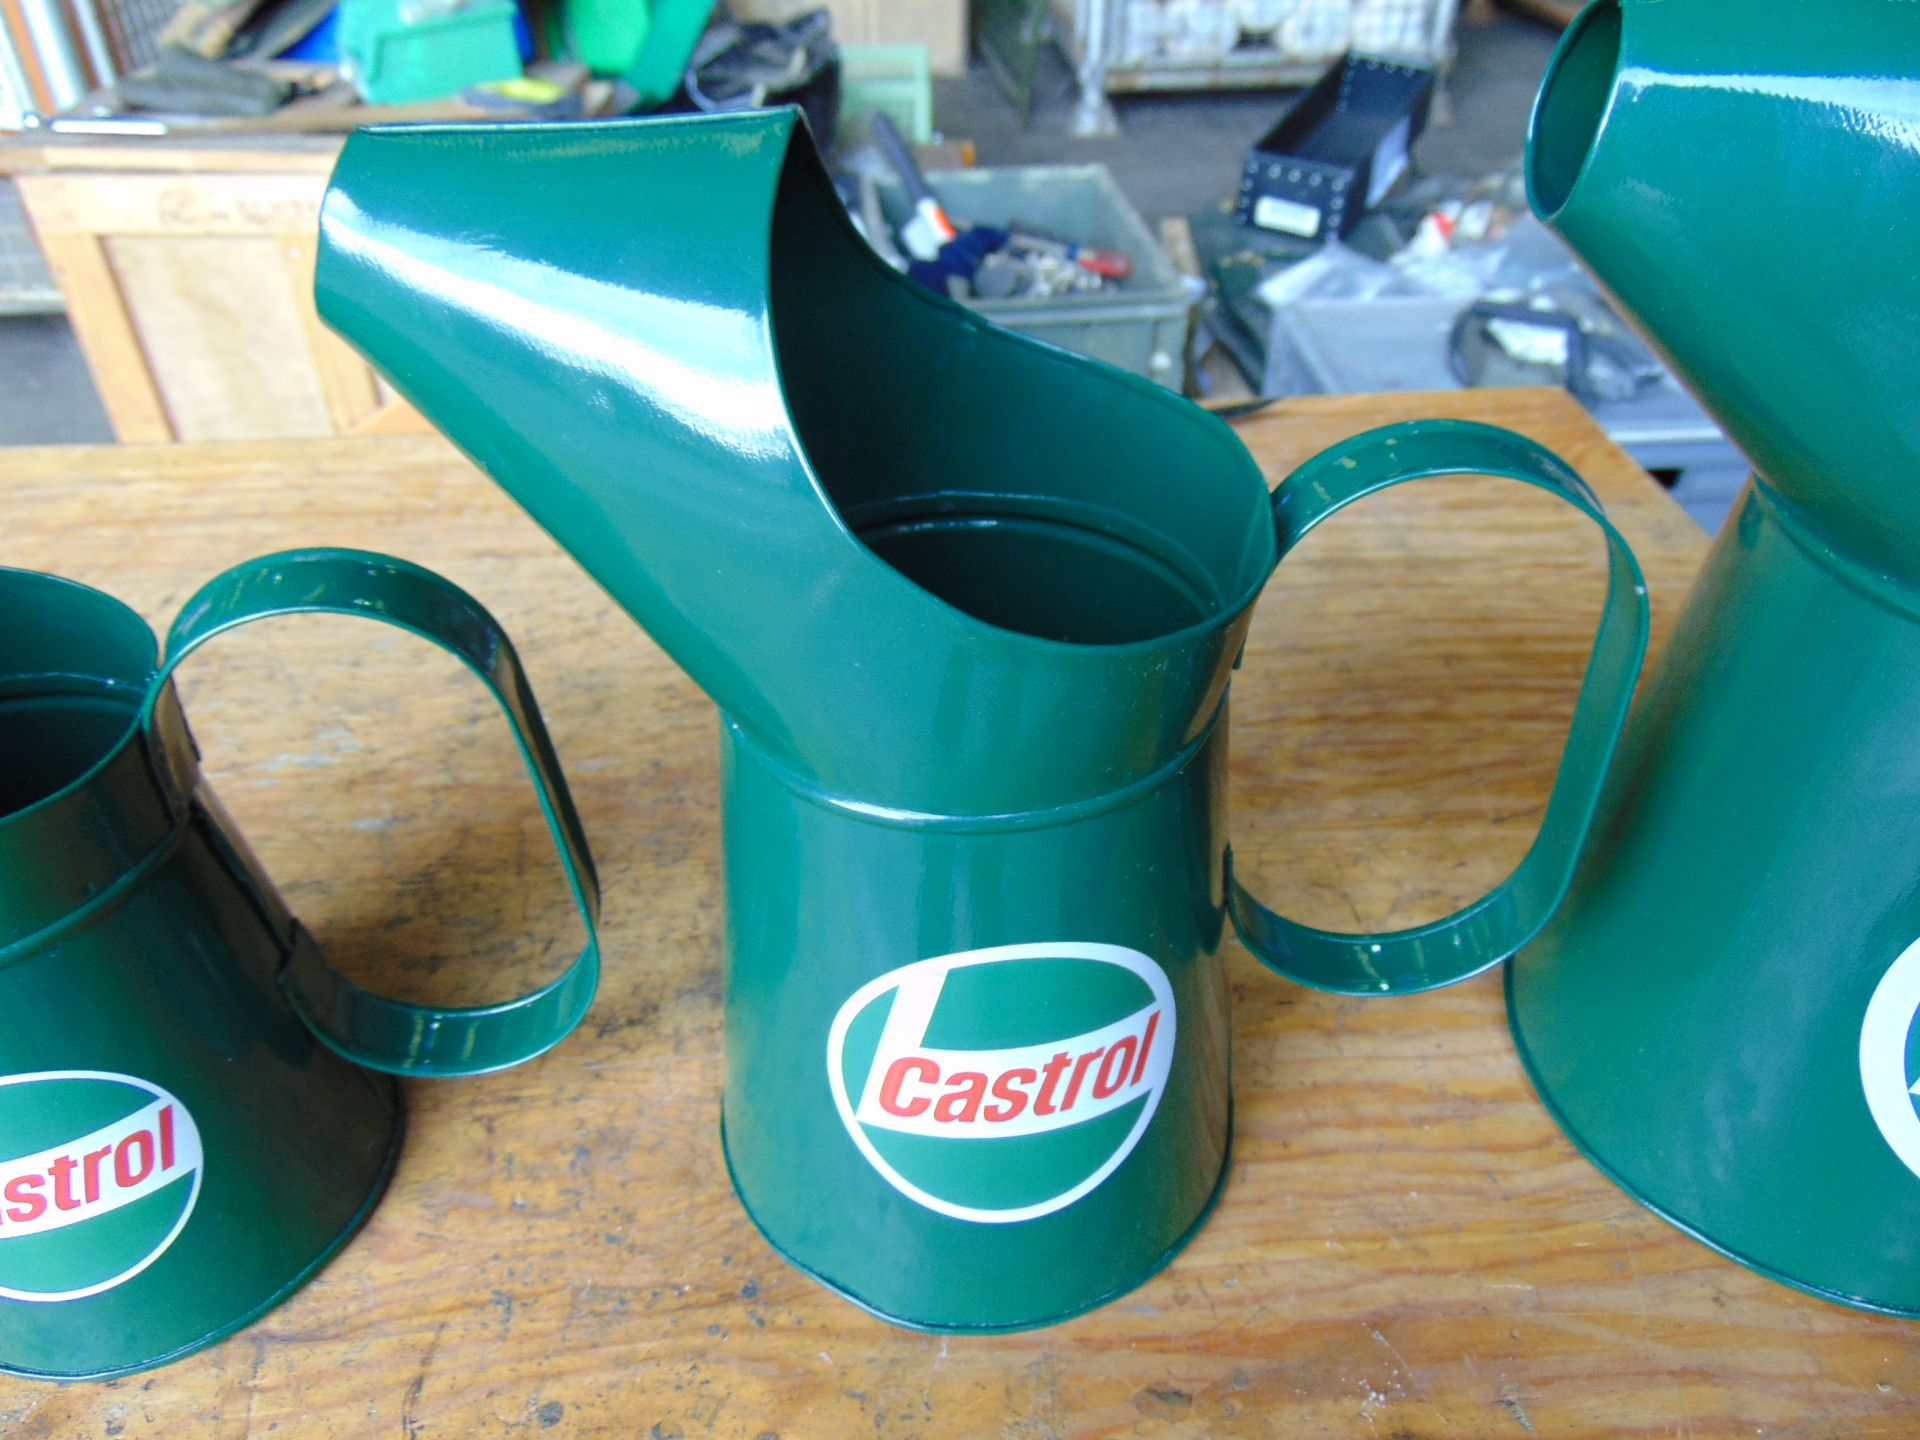 Set of 5 New Unissued Castrol Oil Jugs - Image 8 of 10